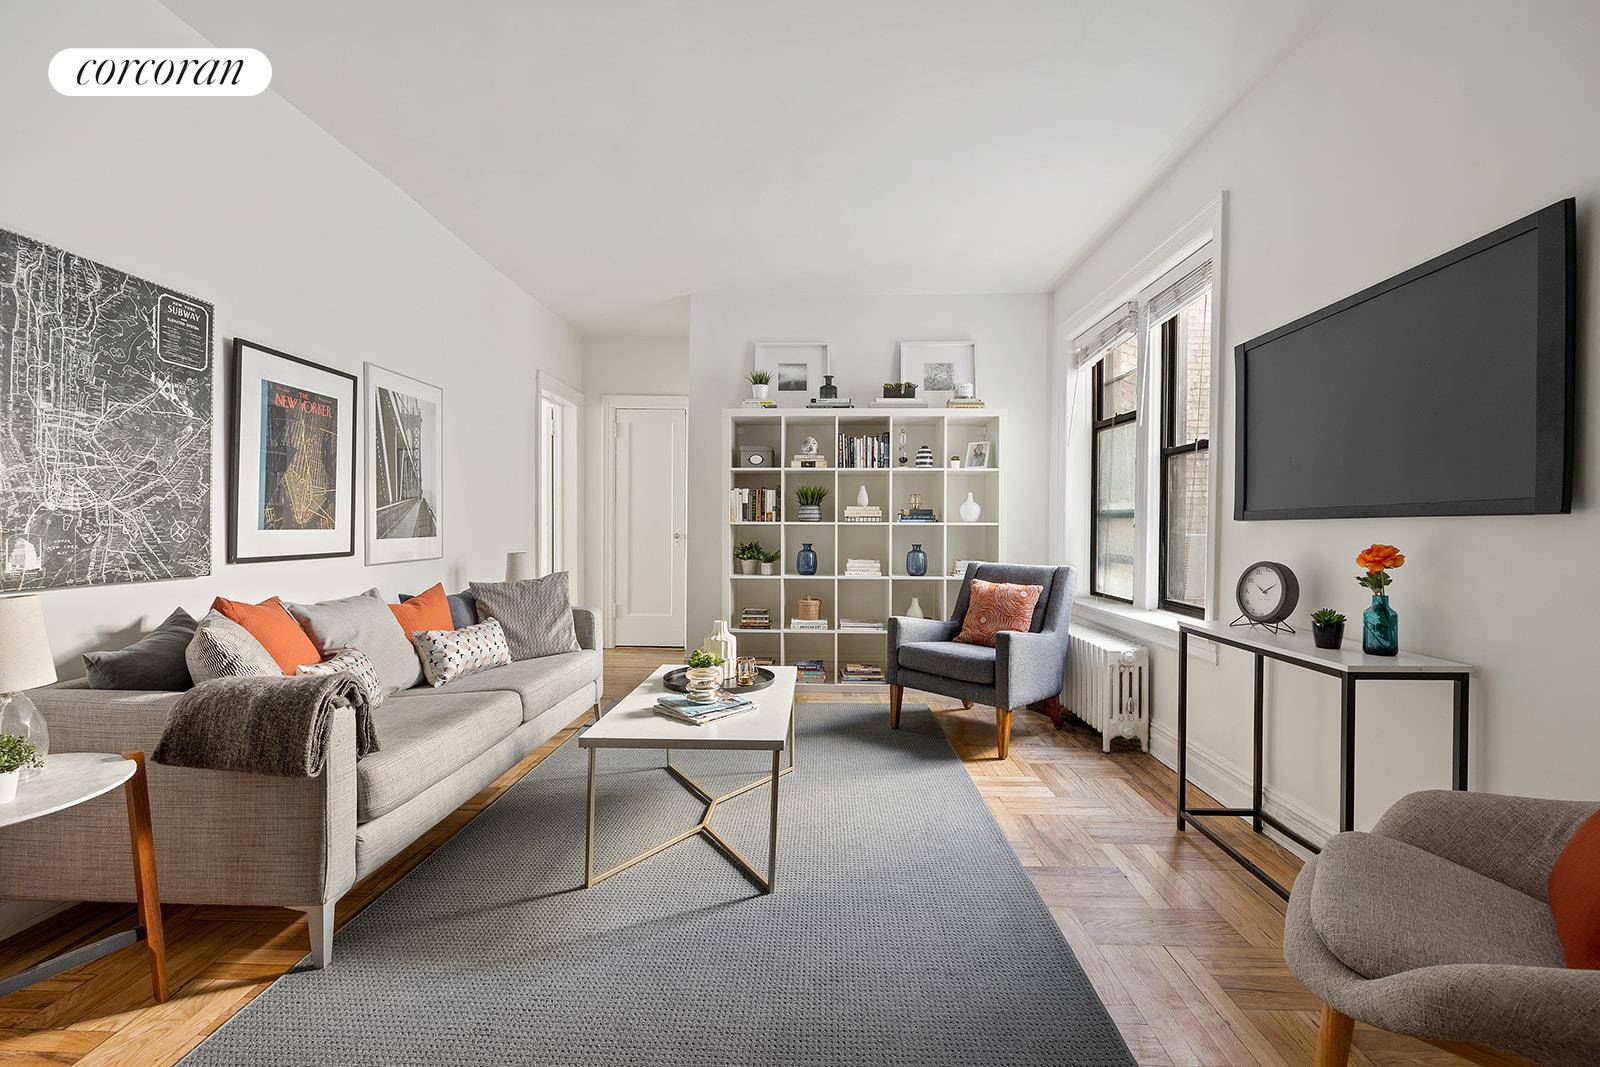 With a renovated kitchen and bathroom, this expansive pre war Park Slope CONDO is a rare fine !